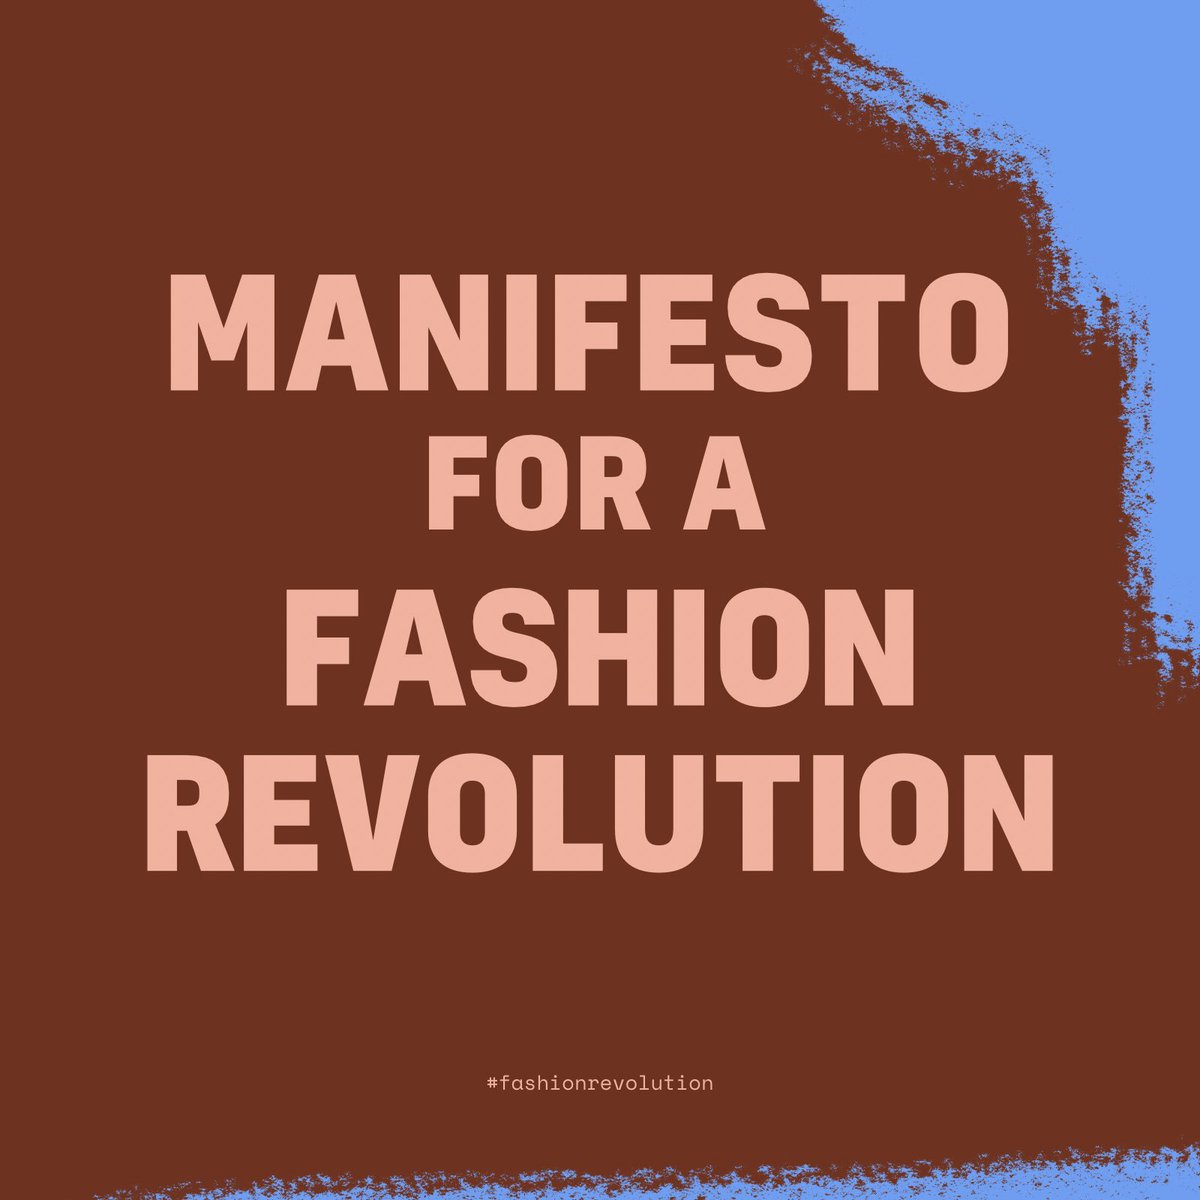 We are excited to announce this years #FashionRevolutionWeek theme: Manifesto for a Fashion Revolution! 🗓 22nd - 29th April 2023